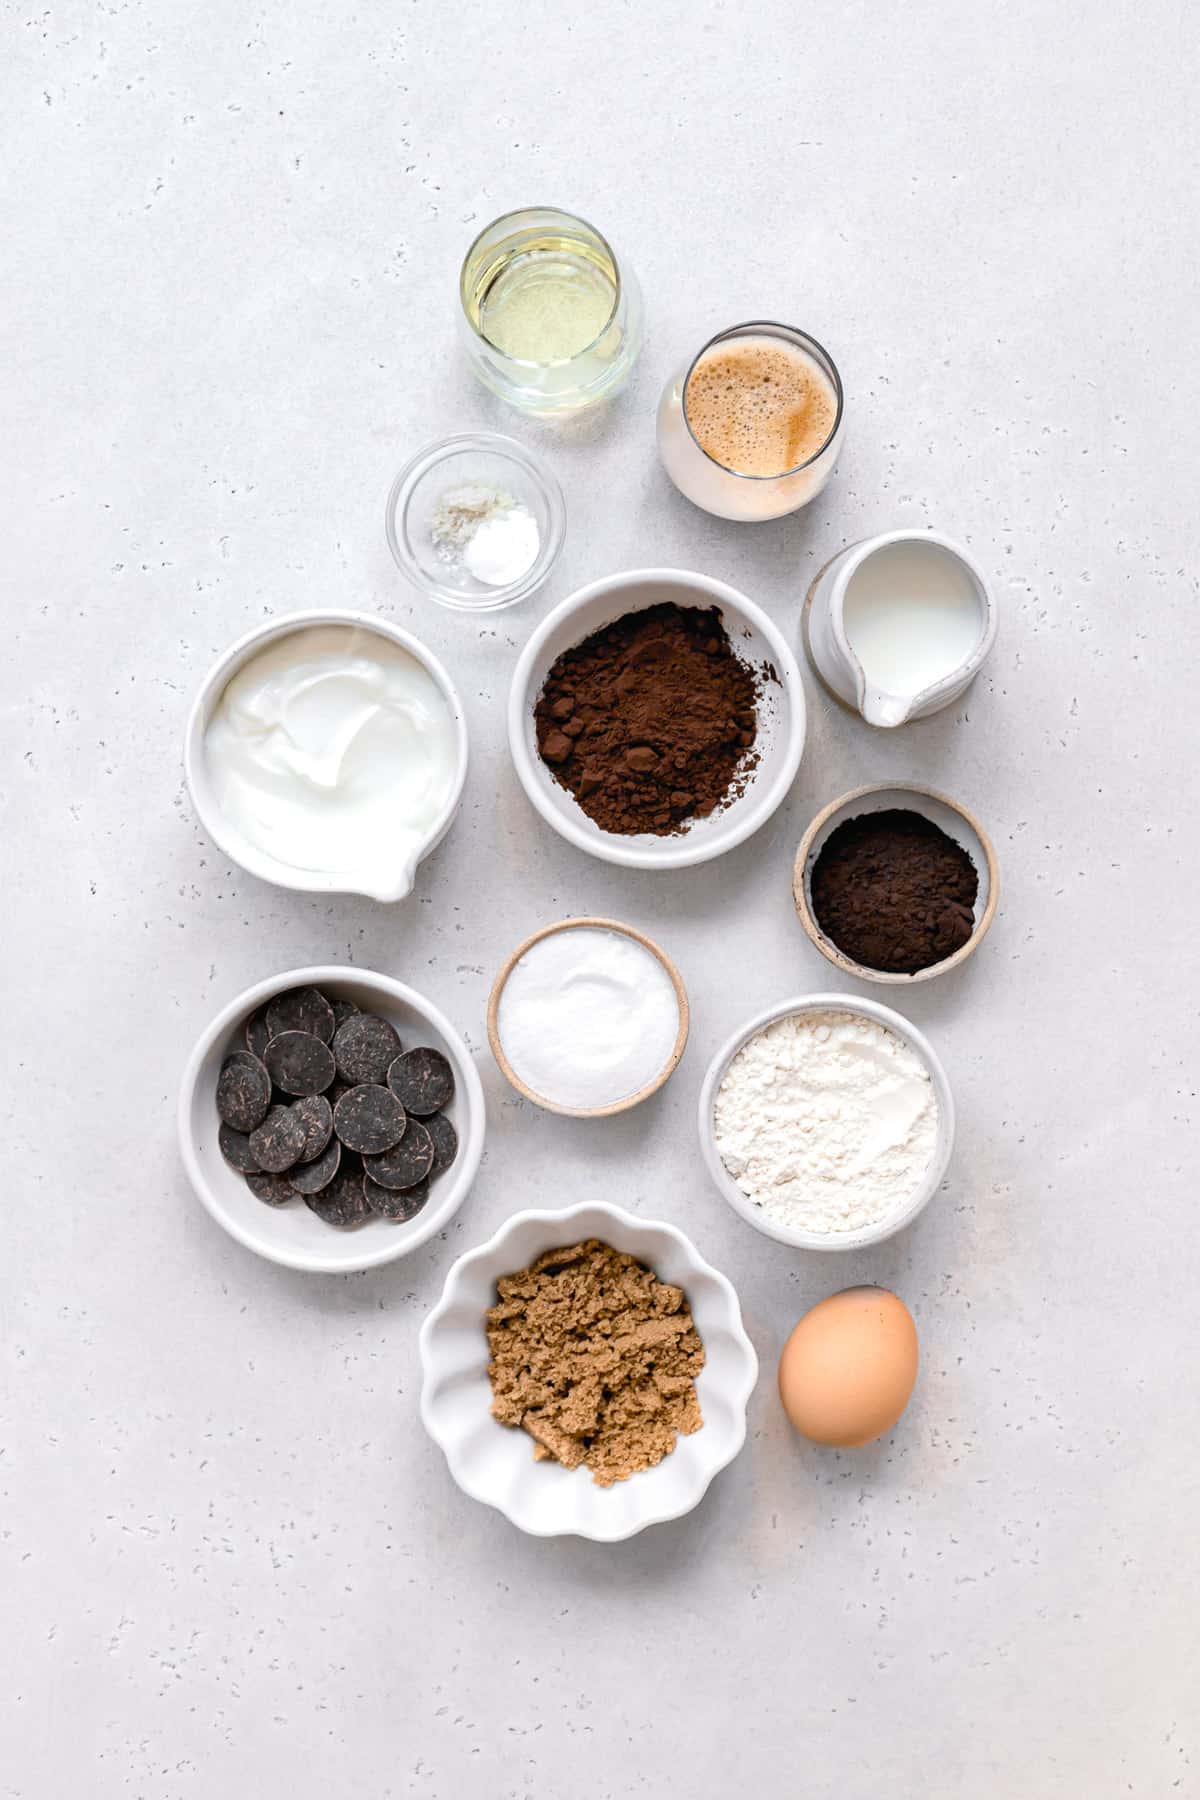 ingredients for baked chocolate donut recipe.